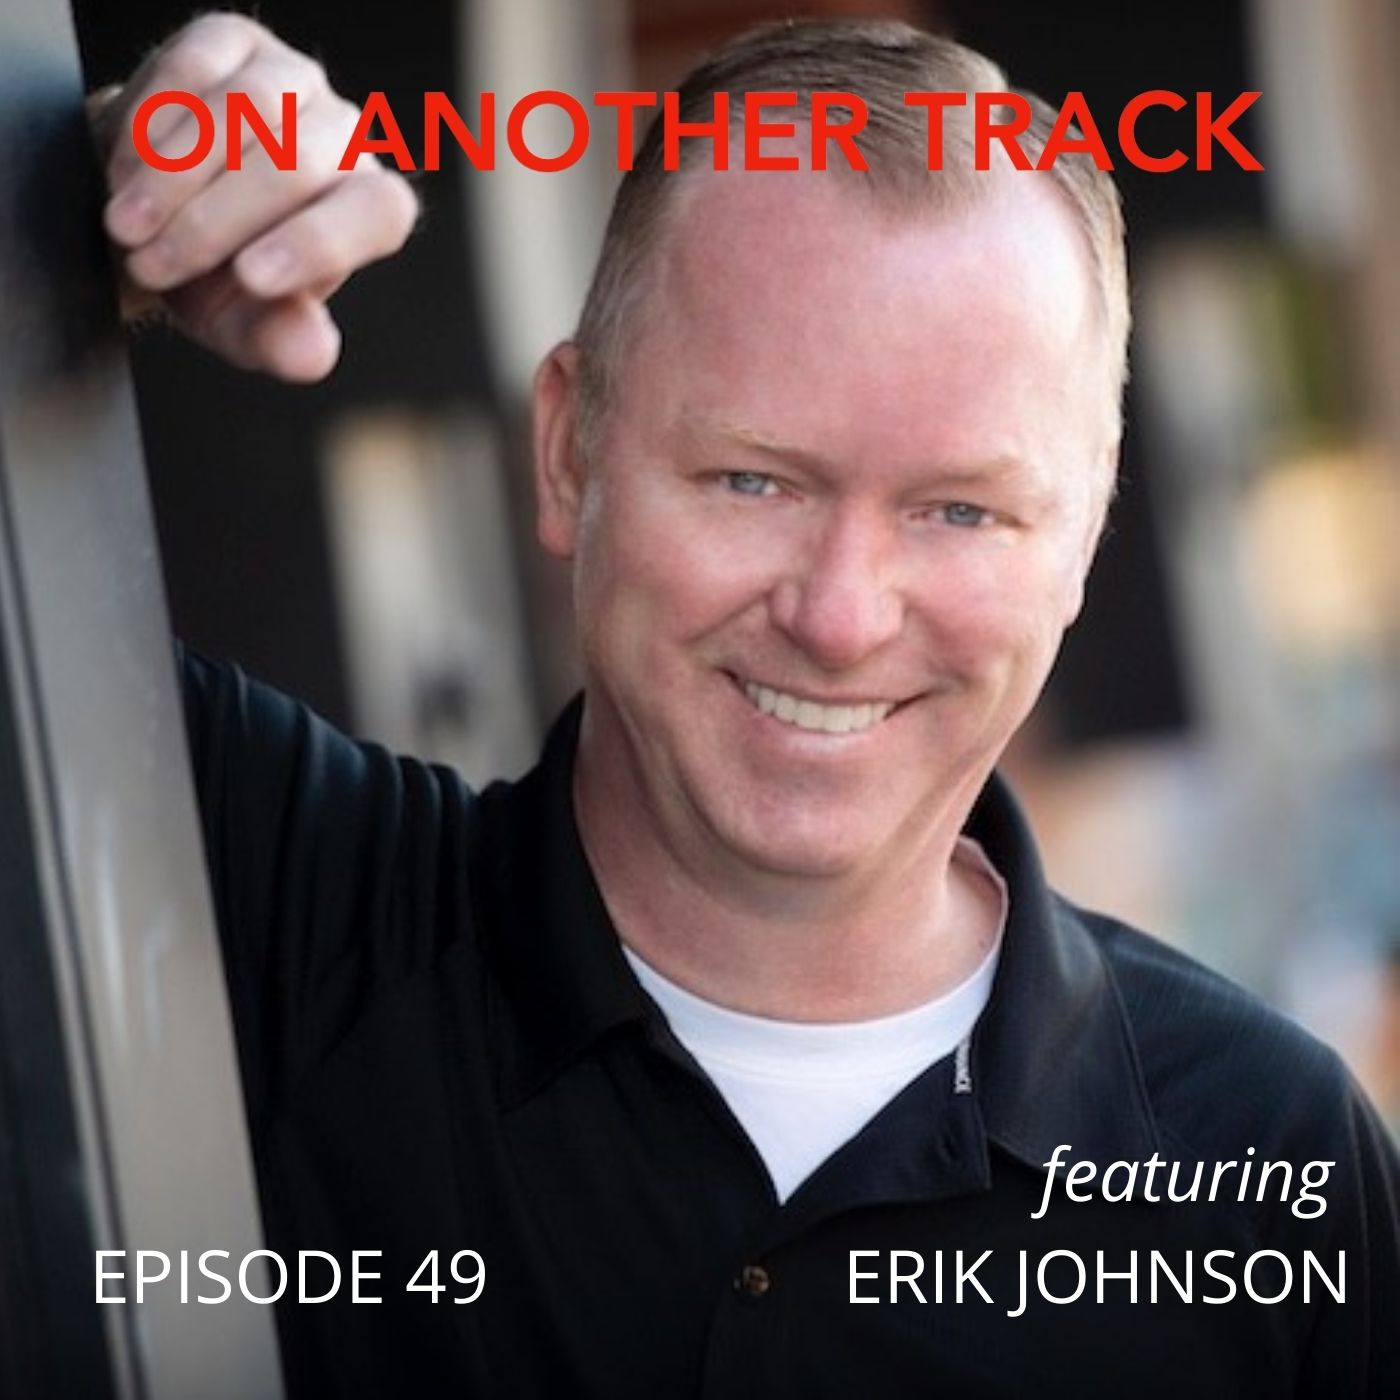 Erik Johnson - How do you earn revenue from your podcast? Image